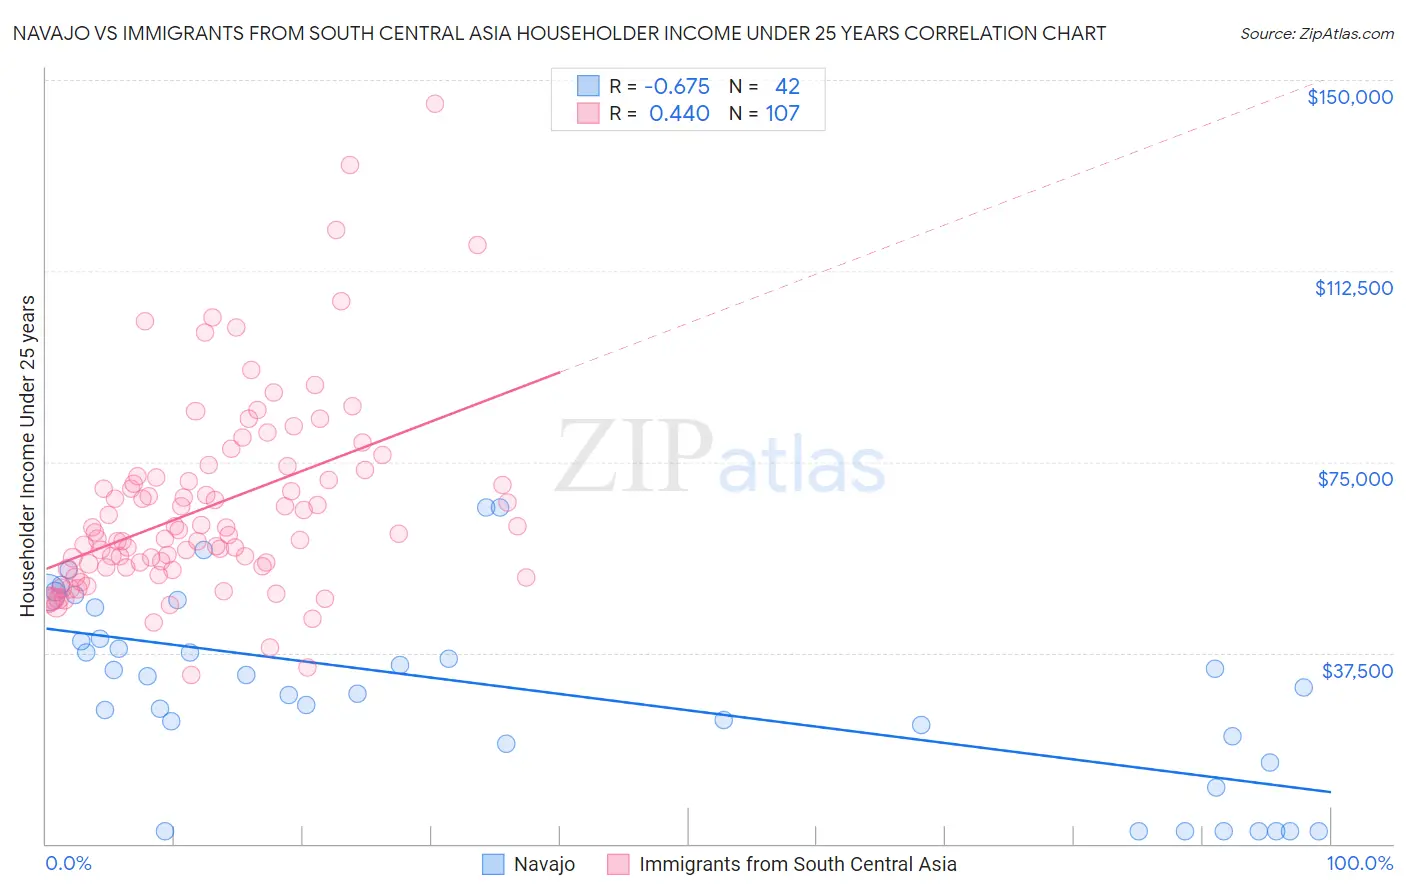 Navajo vs Immigrants from South Central Asia Householder Income Under 25 years